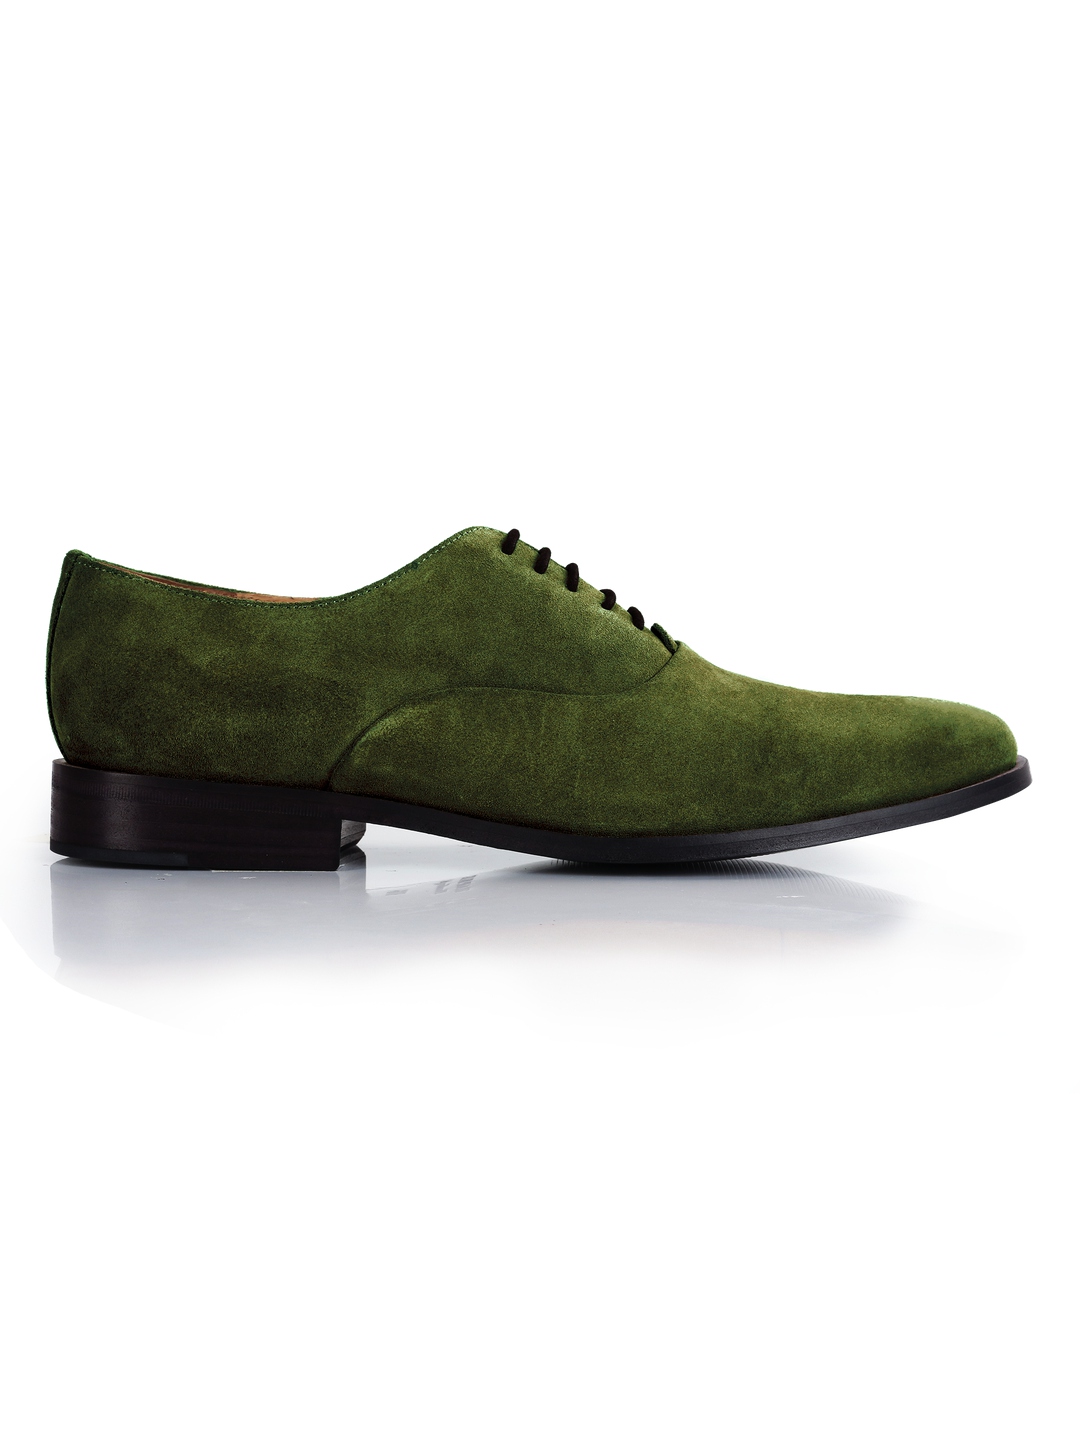 FDF SHOES Oxfords-Shoes Mens Suede Green 